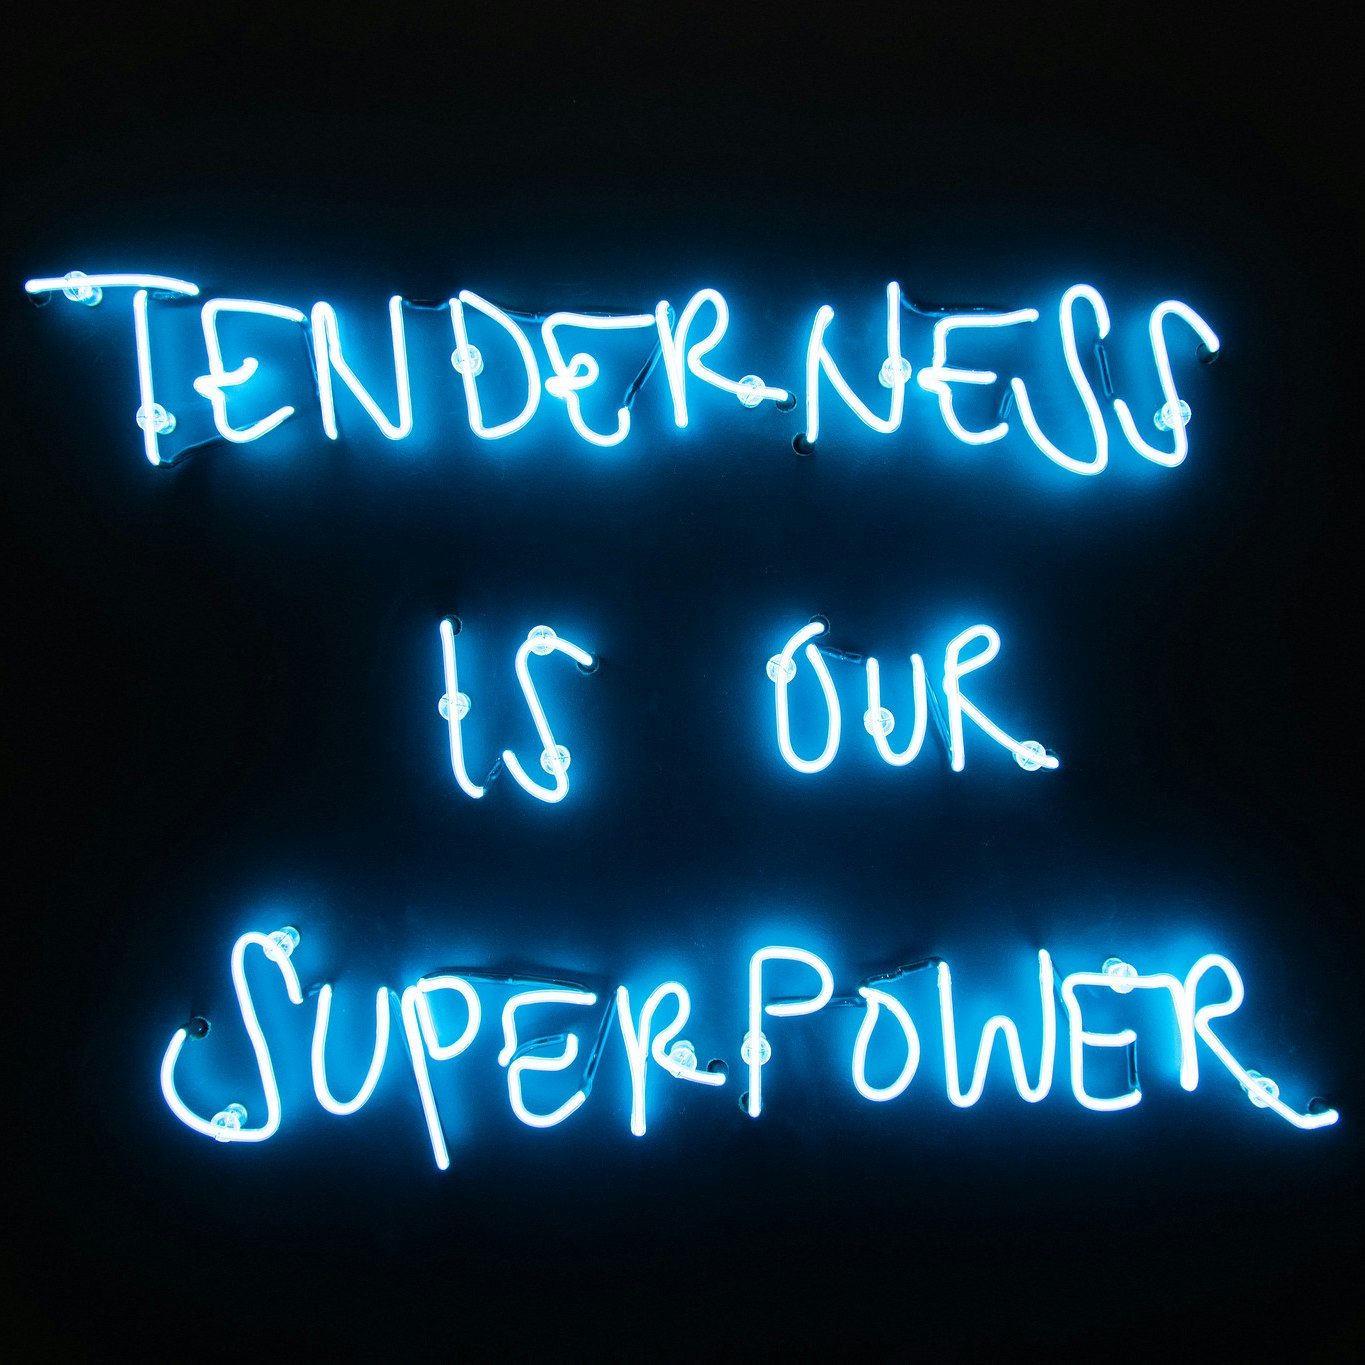 An image of a black chalkboard with white neon writing that says "Tenderness is our Superpower."